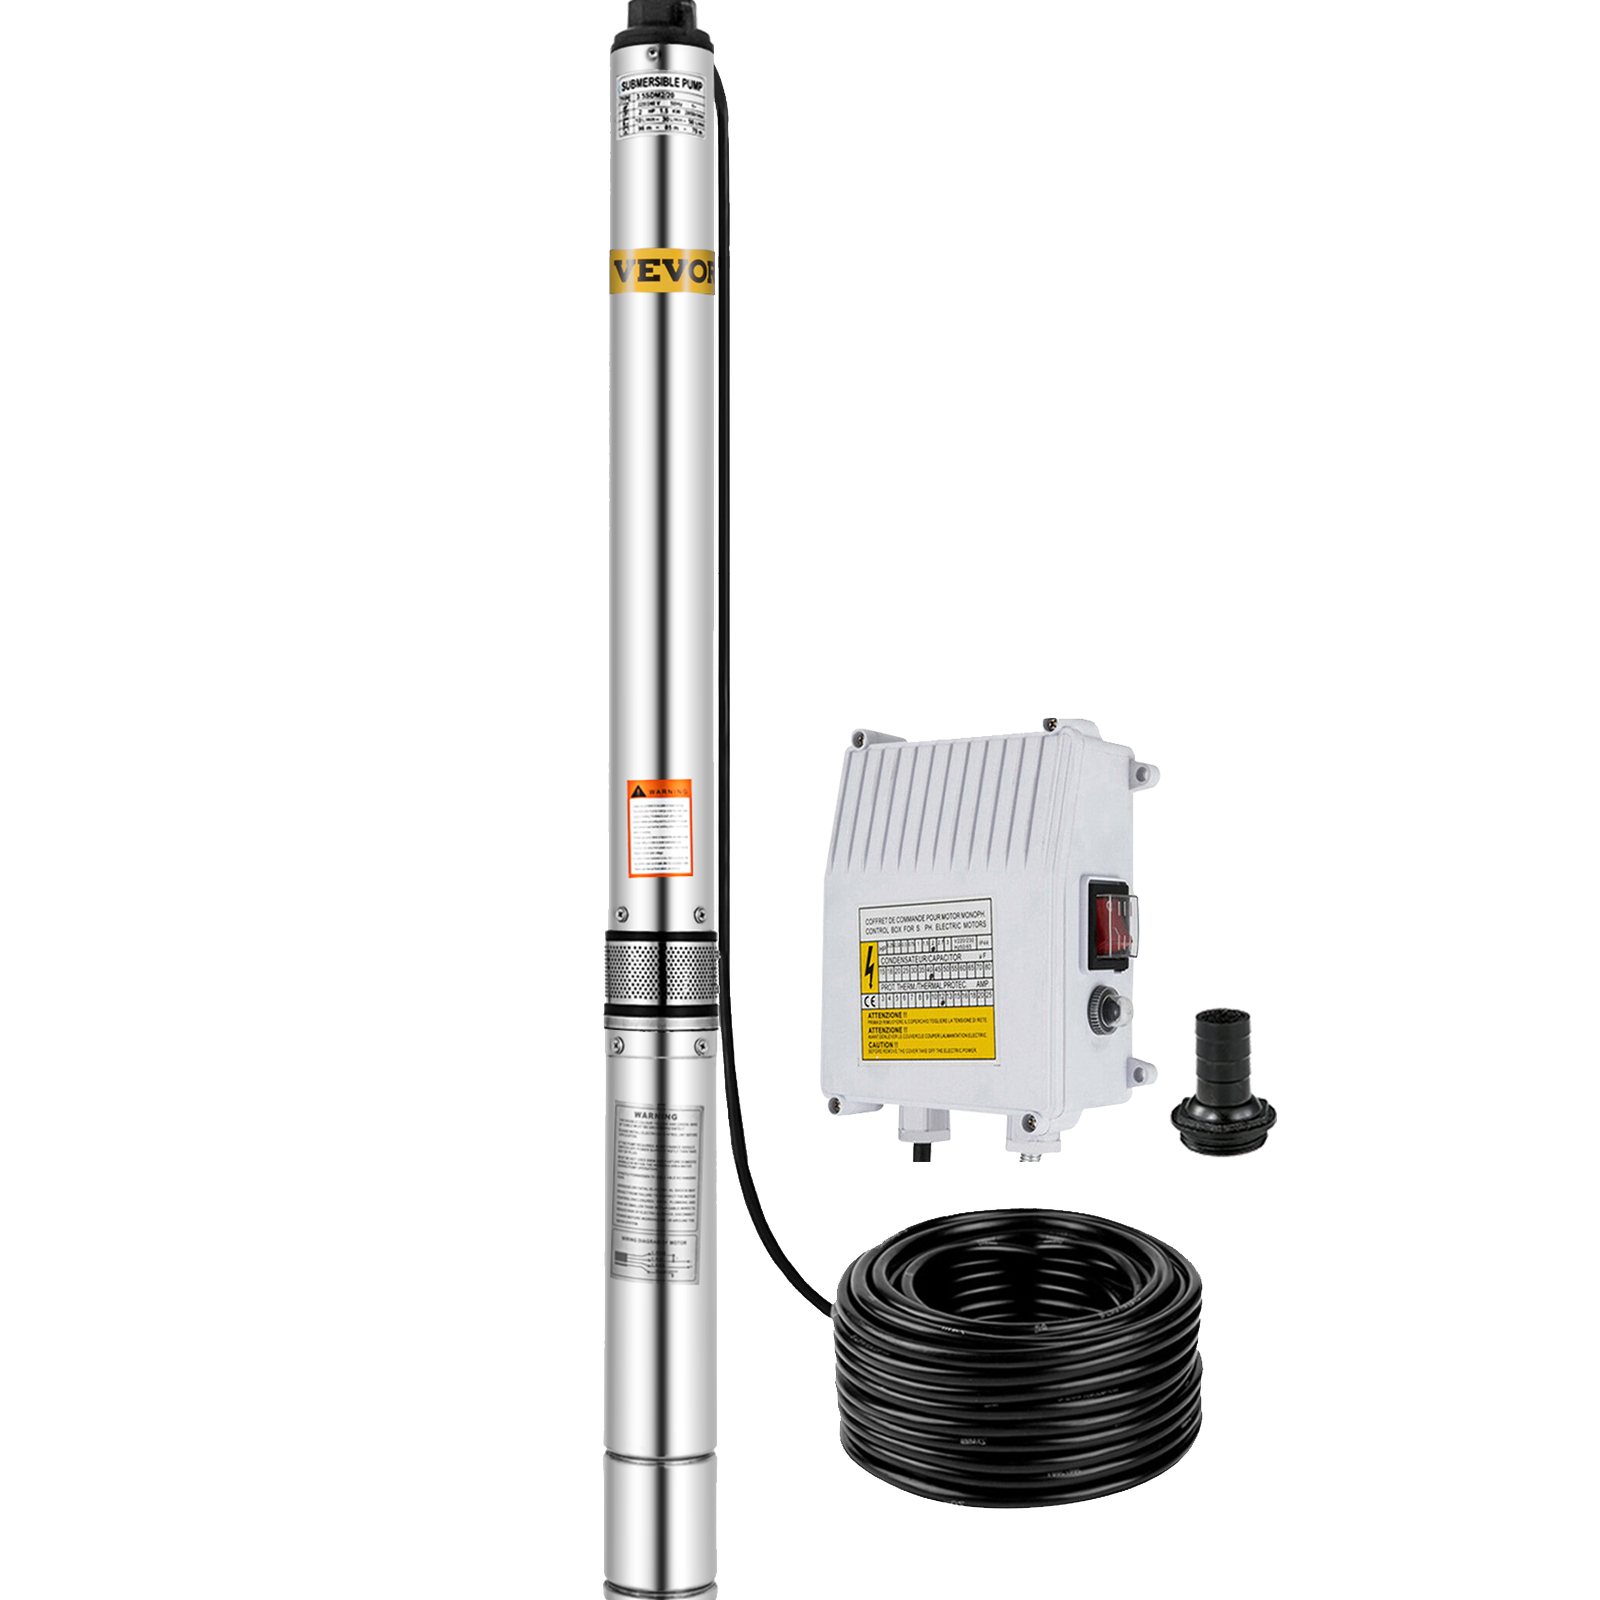 Submersible Pump 3HP Deep Well Pump 32.8ft Cable 4" 220V 630FT w/Control Box от Vevor Many GEOs